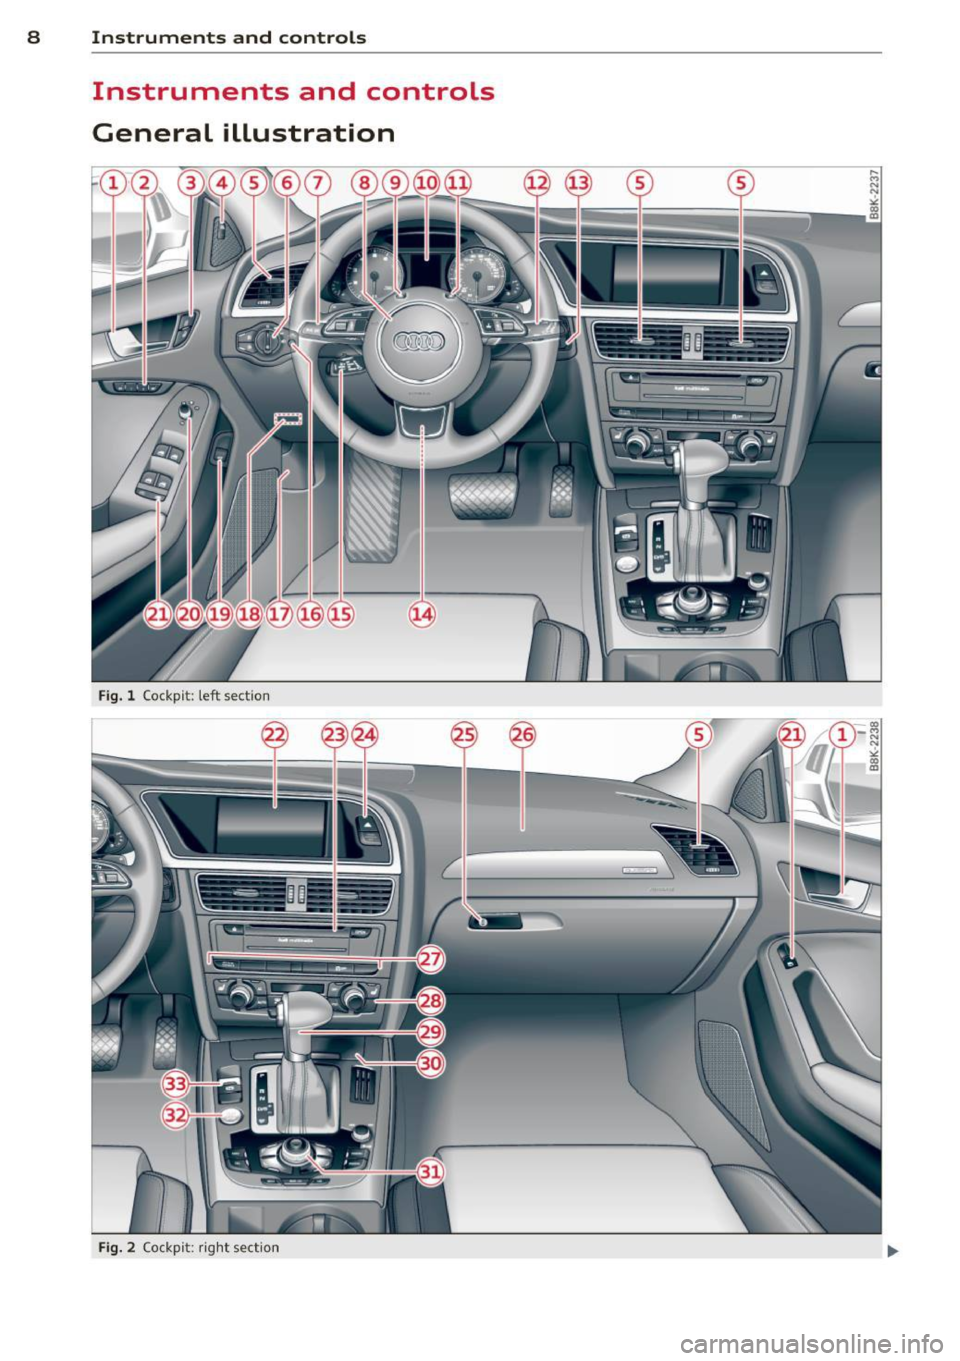 AUDI S4 2013  Owners Manual 8  Instruments and controls 
Instruments  and  controls 
General  illustration 
Fig. l Cockp it:  left  sect io n 
---=- ---1 =----- -
- --
- --
Fig. 2 Cock pi t: ri ght  sect io n  